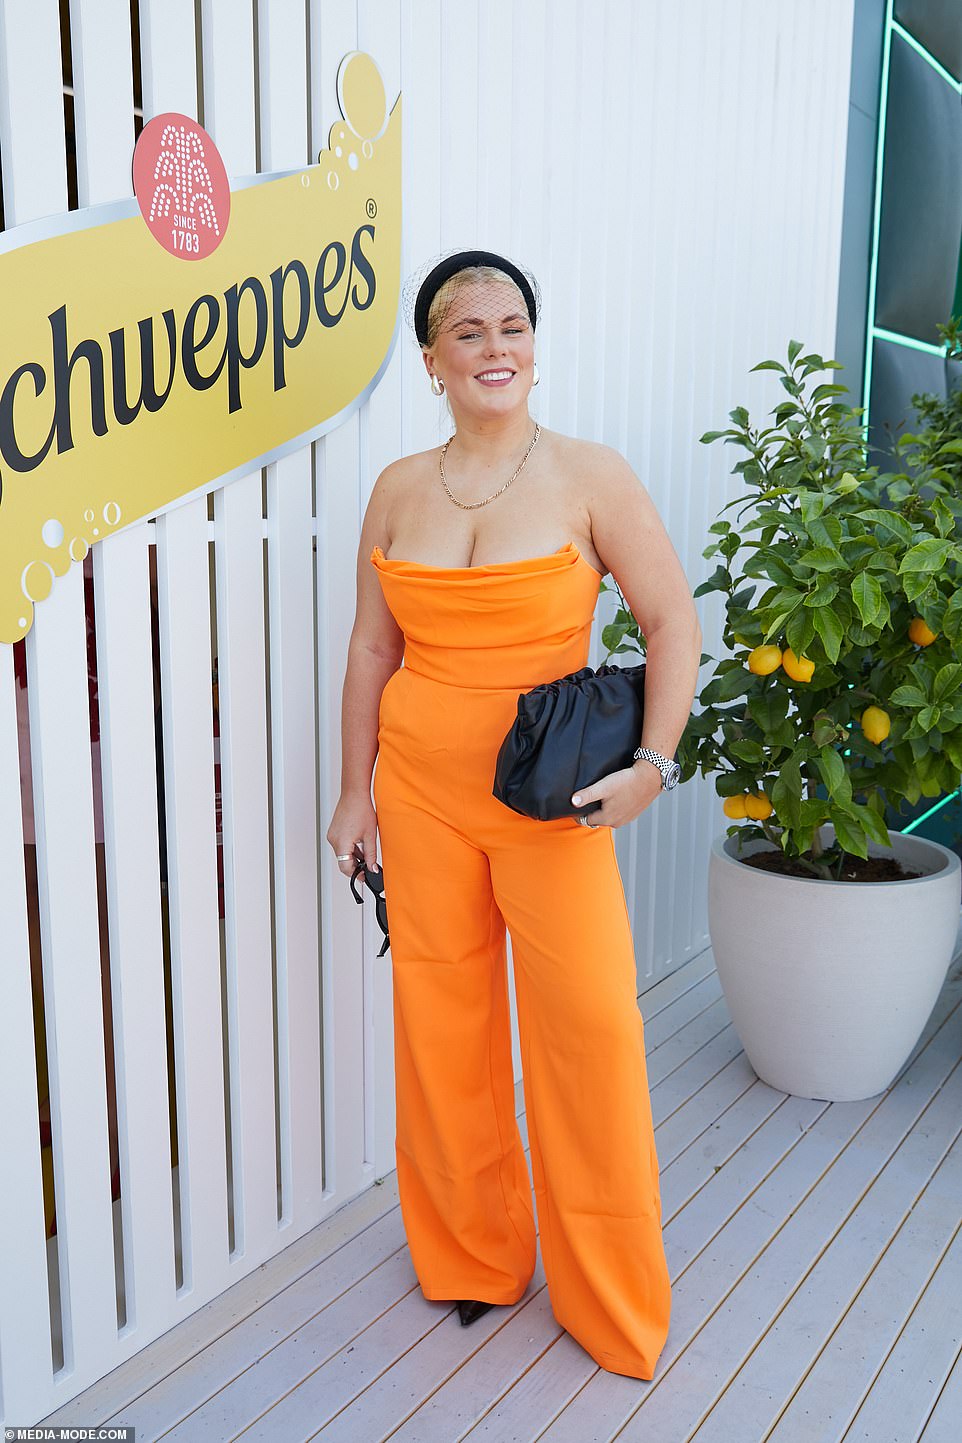 Shane Warne's daughter Brooke also dared to bare in a plunging tangerine jumpsuit